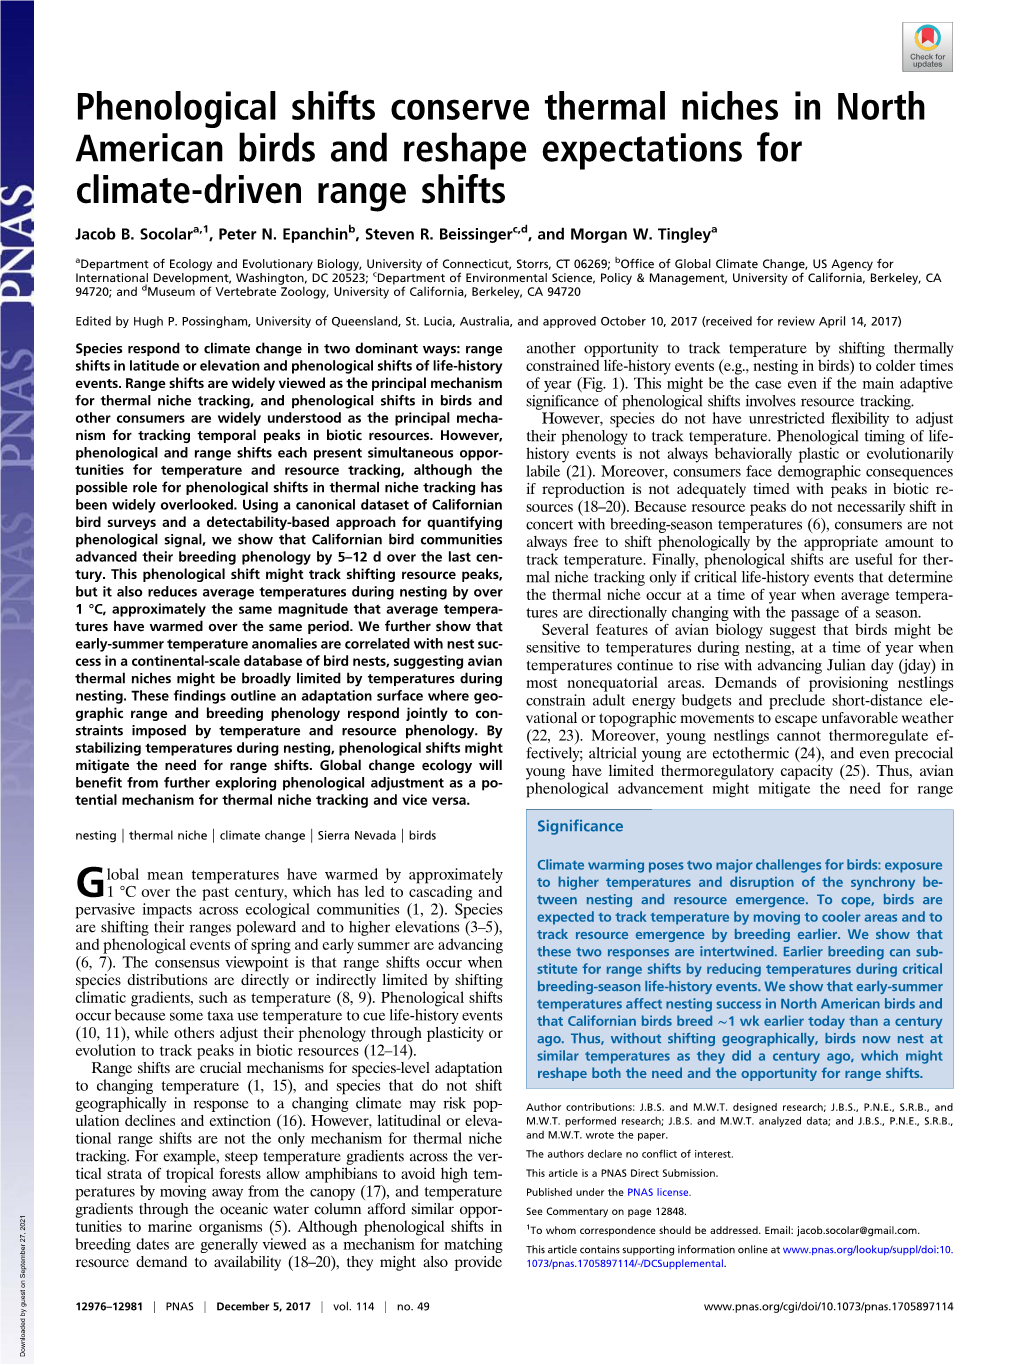 Phenological Shifts Conserve Thermal Niches in North American Birds and Reshape Expectations for Climate-Driven Range Shifts